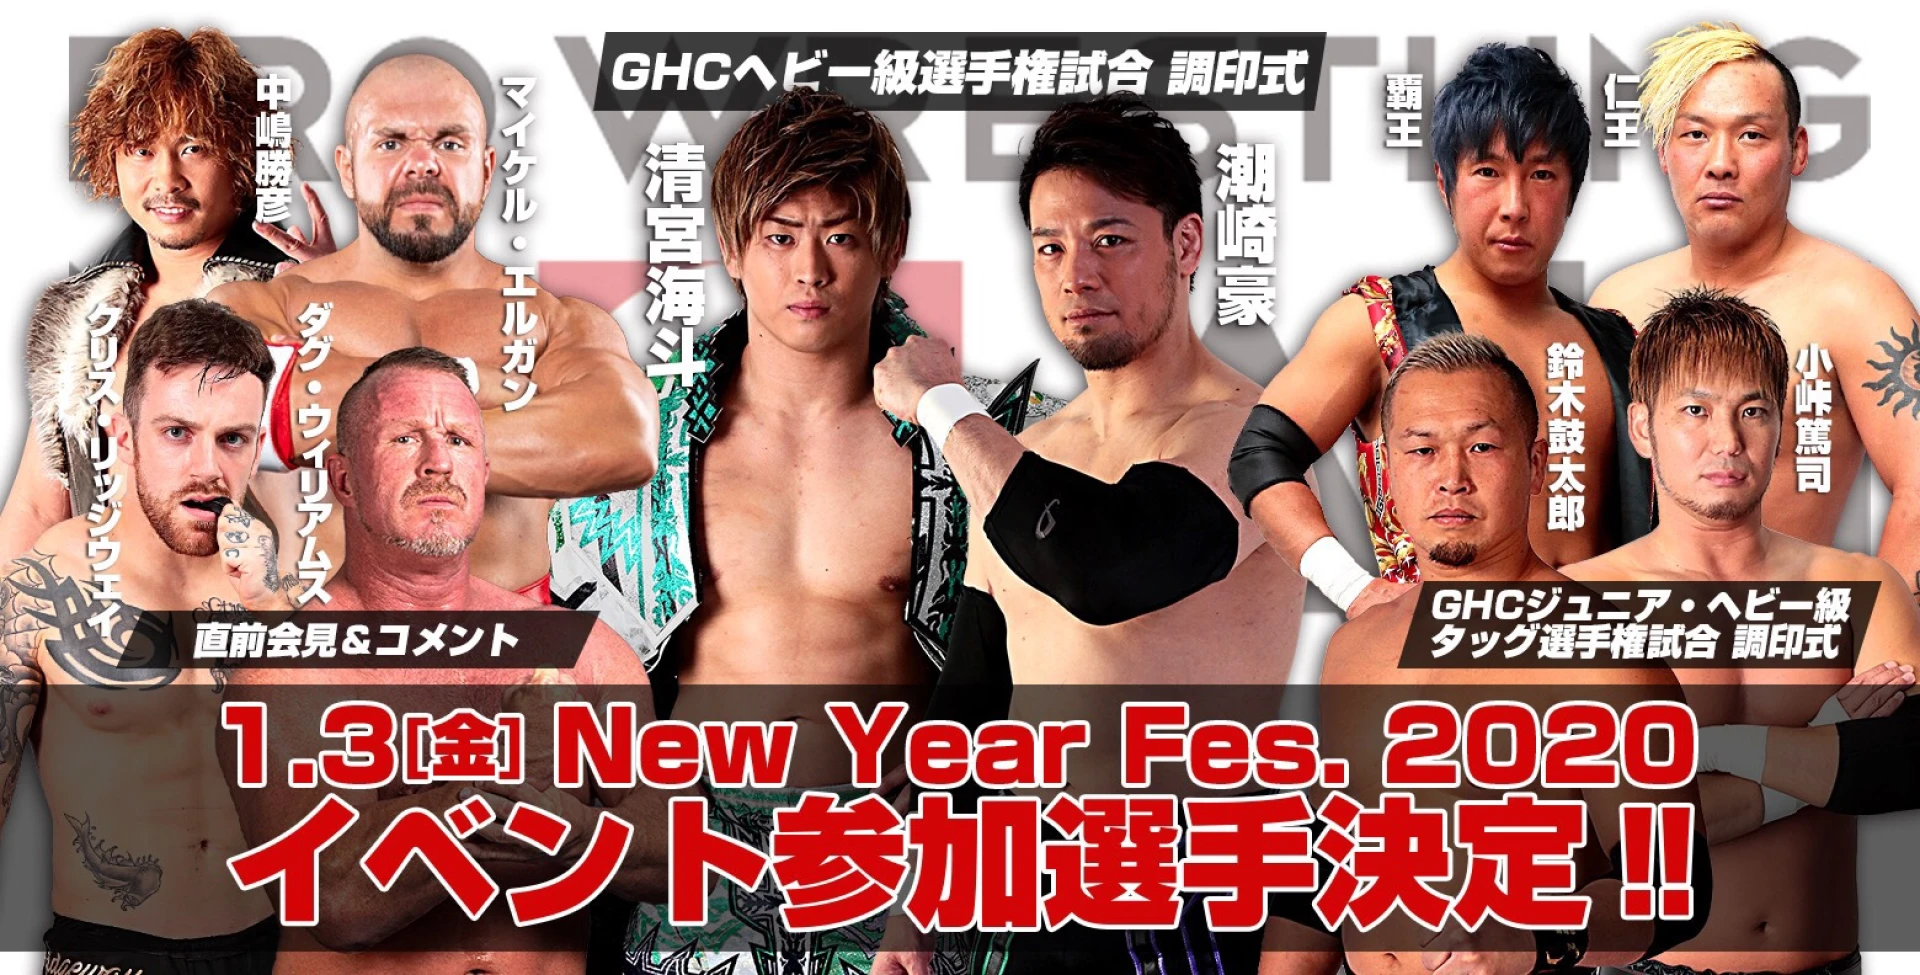 【GHCヘビー・GHCJrタッグ調印式開催】New Year Fes. 2020 開催のお知らせ～サイン＆撮影会も開催～